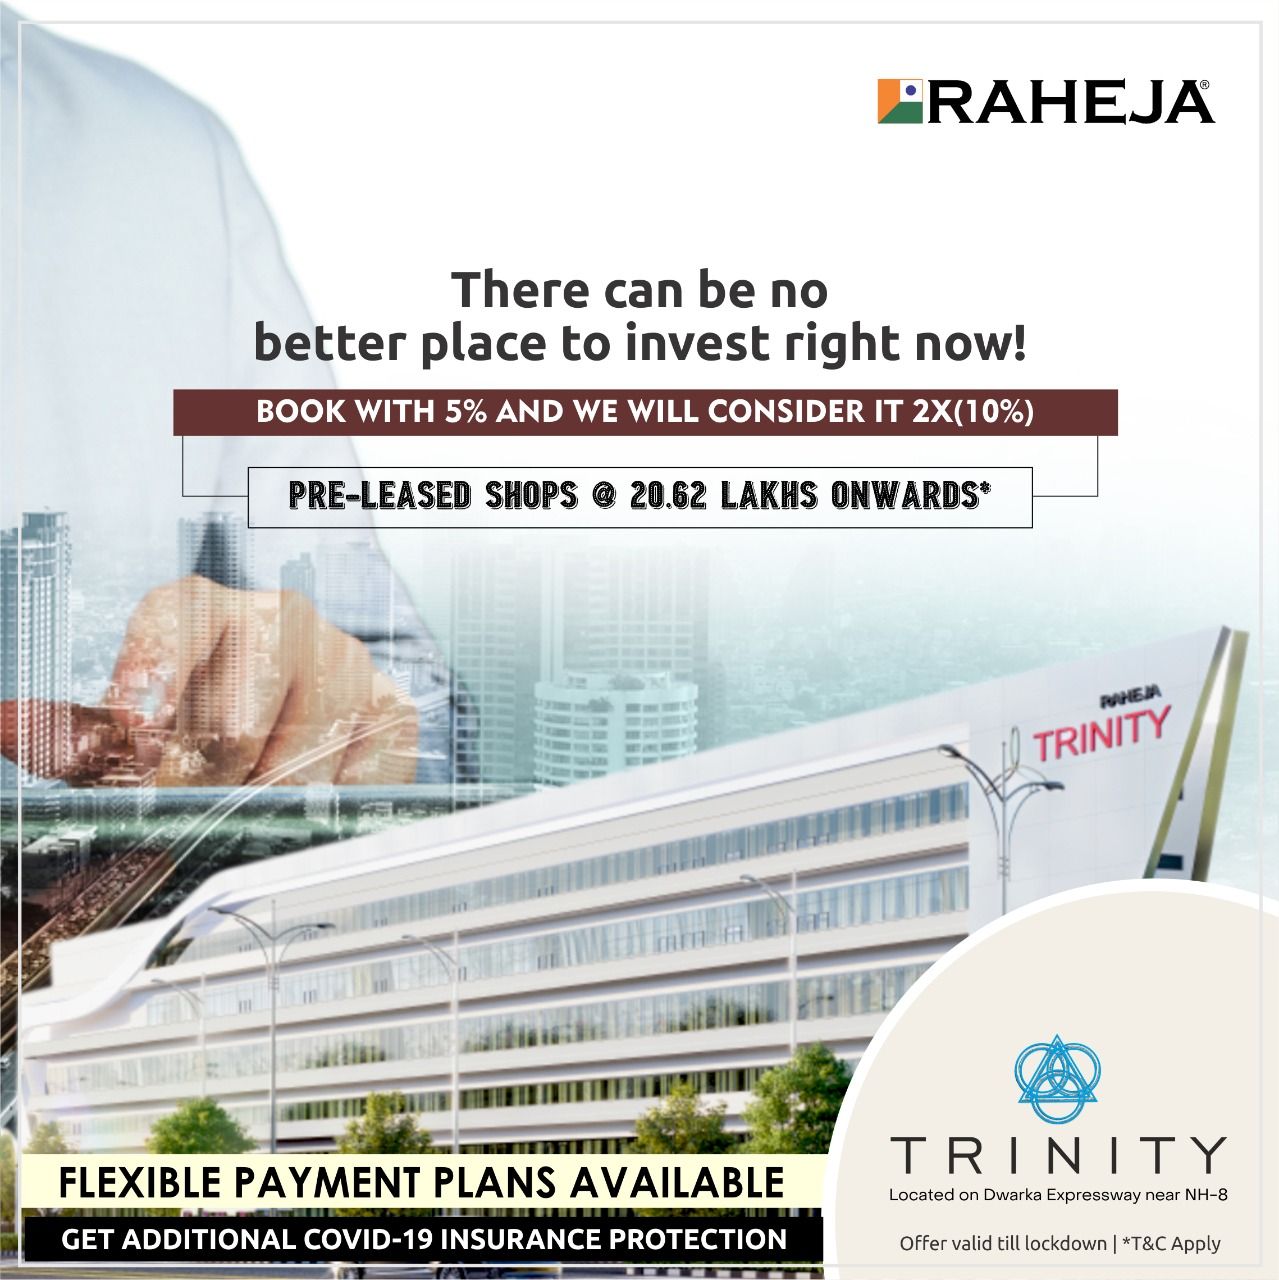 Book with 5% and we will considered it 2X(10%) at Raheja Trinity in Gurgaon Update